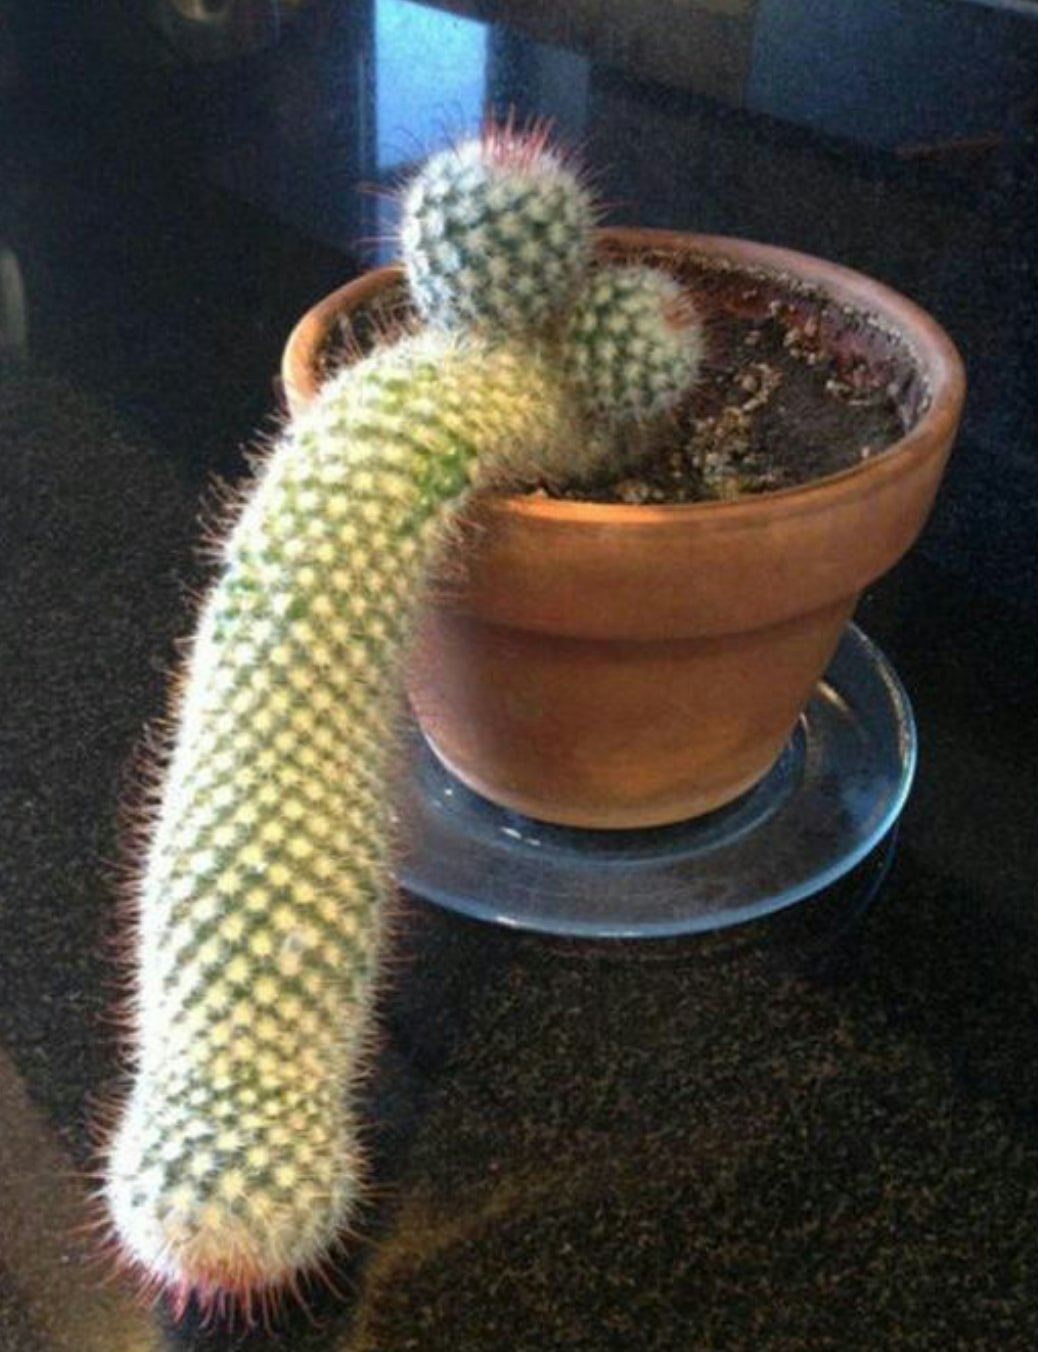 Your very own cocktus.